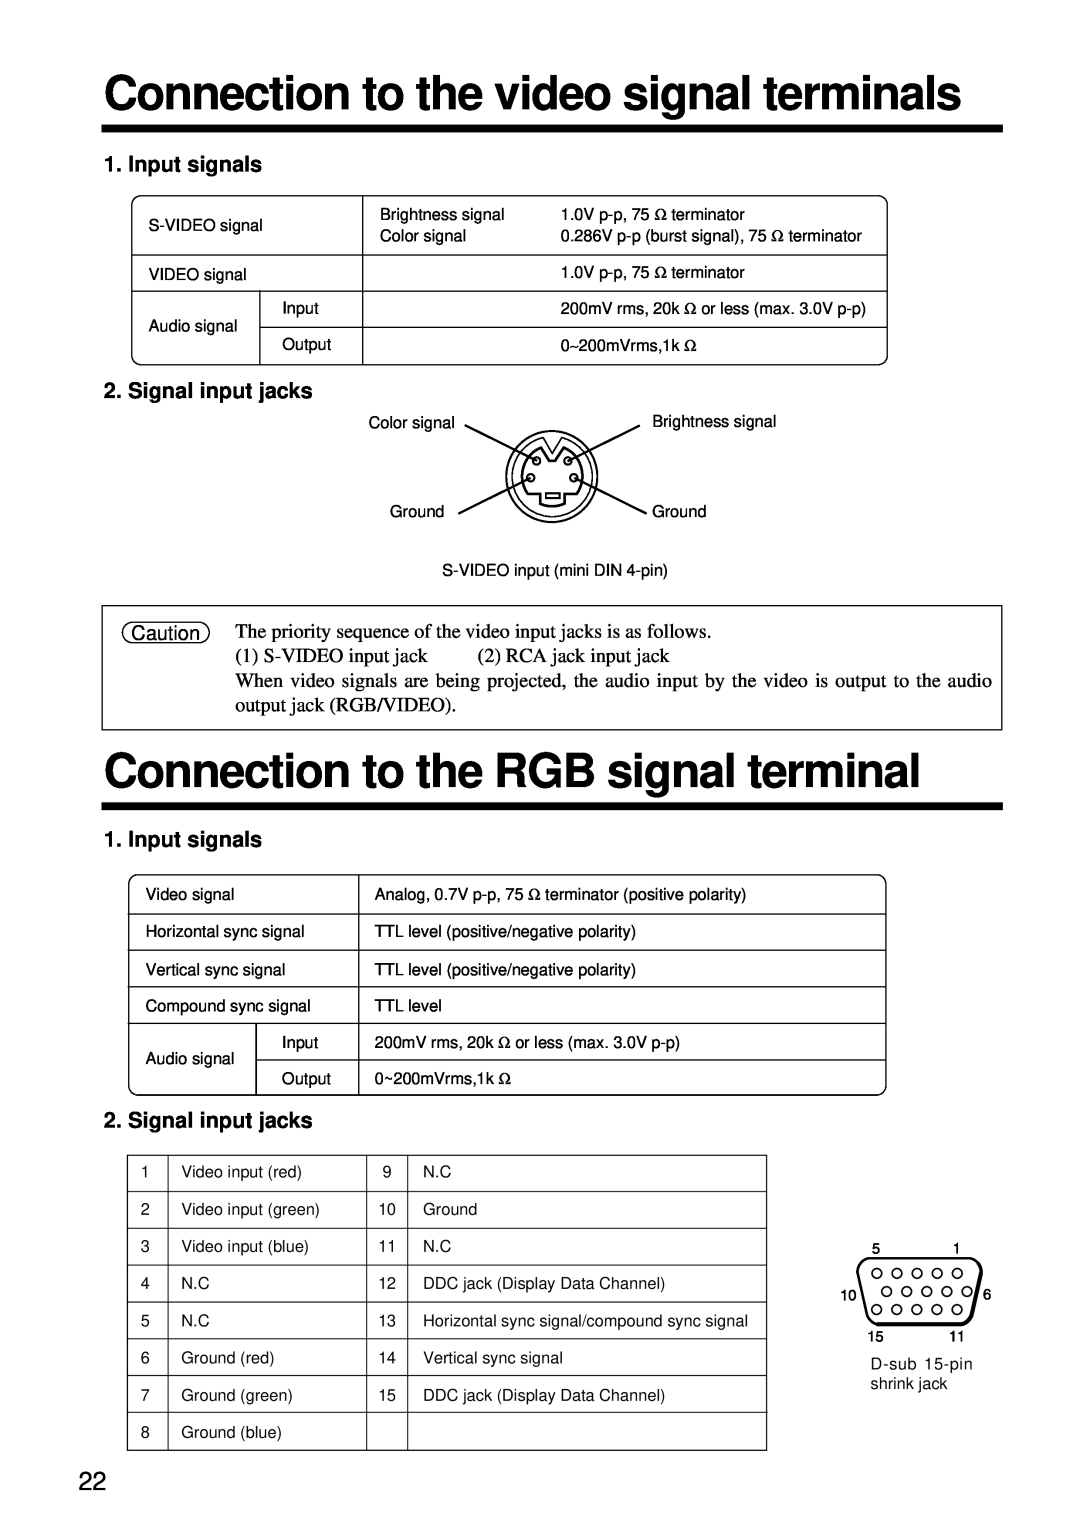 Hitachi CP-S860W user manual Connection to the video signal terminals, Connection to the RGB signal terminal, Input signals 